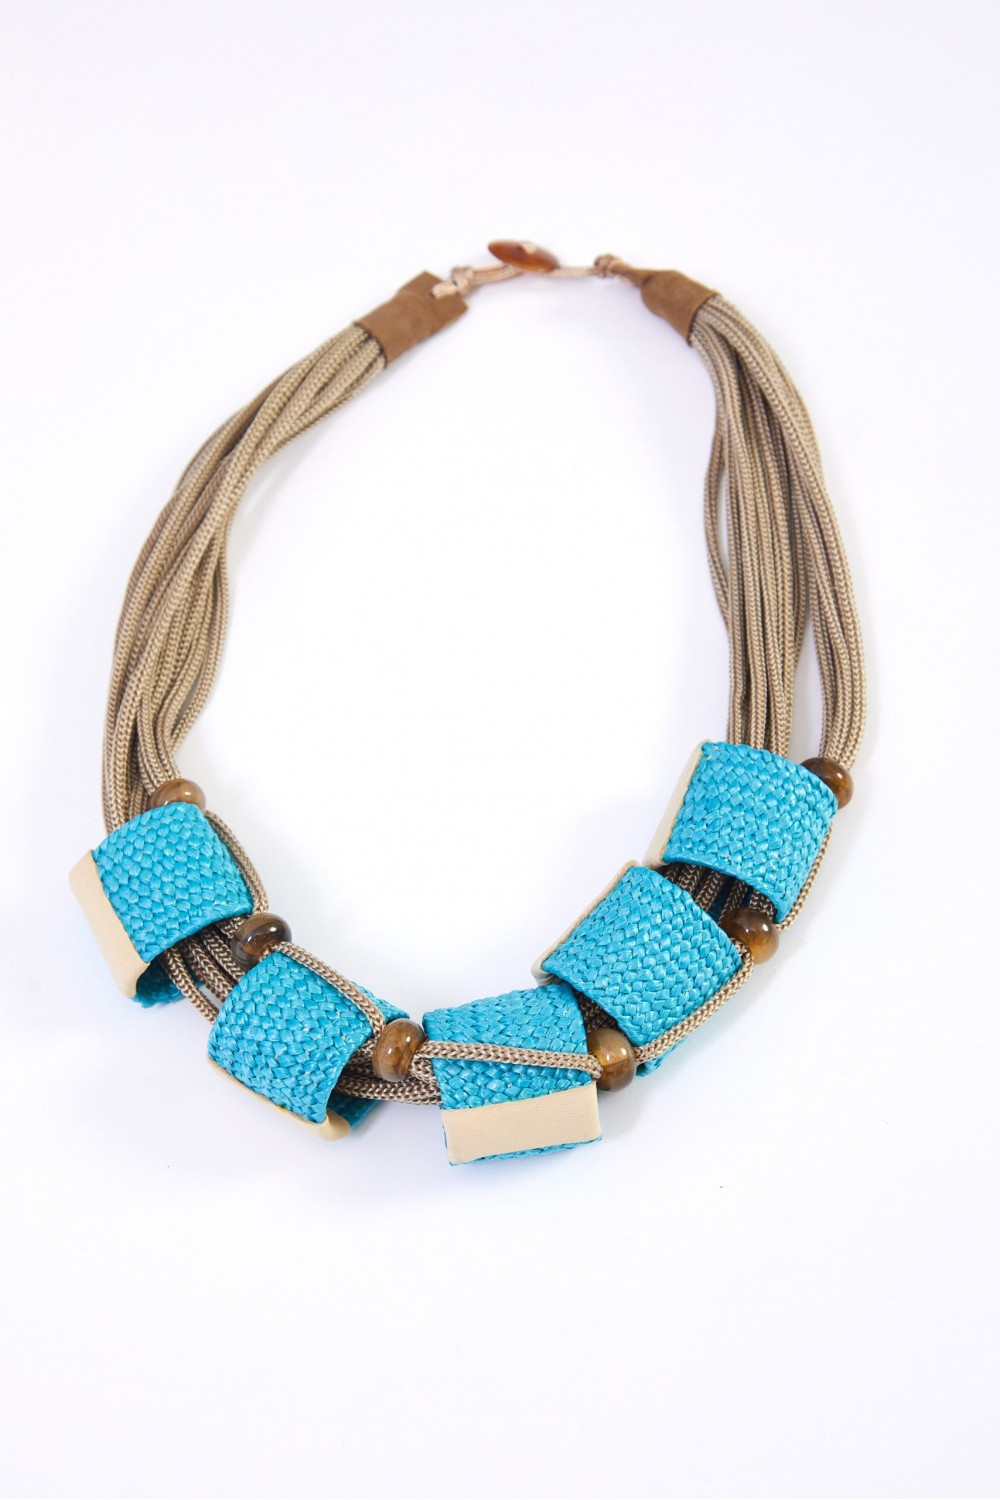 Naya String With Woven Blocks and Beads Necklace Turquois/Taupe